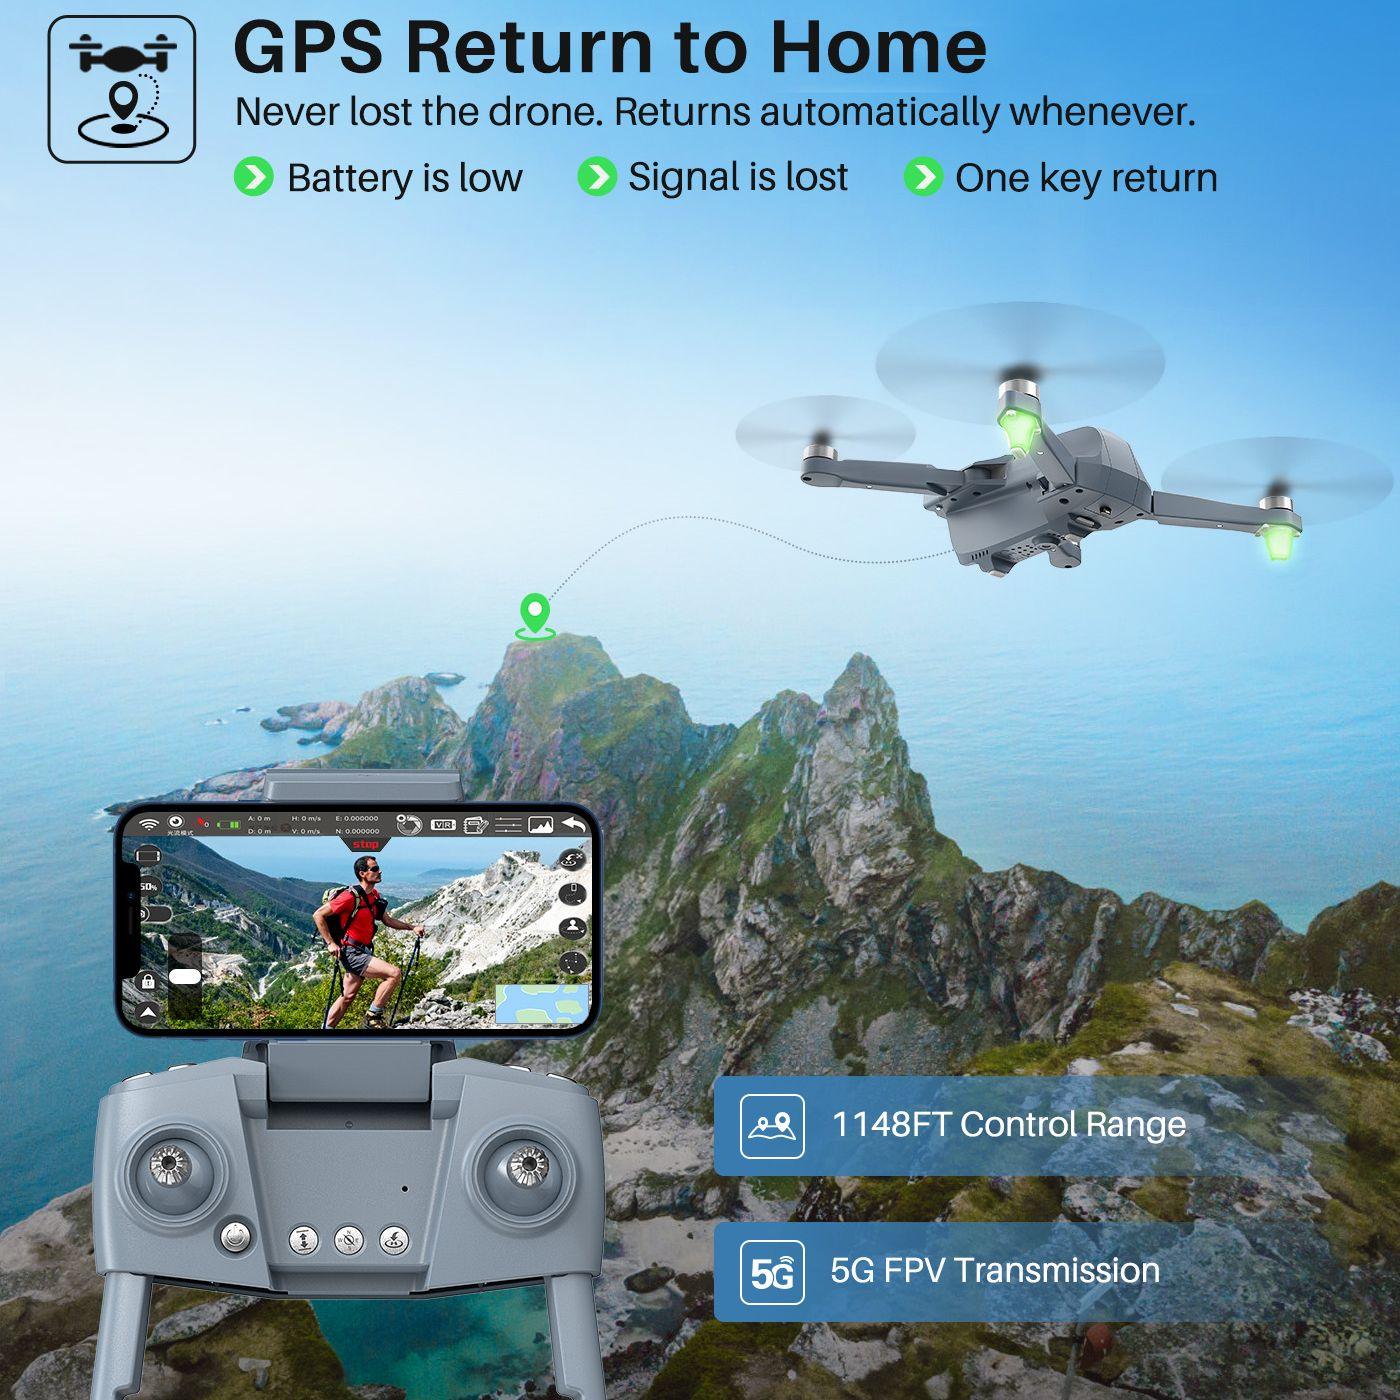 SYMA X500Pro GPS Drones - with 4K UHD Camera RC Quadcopter Brushless Motor, 5G FPV Transmission, Follow Me, Auto Return Home - RCDrone